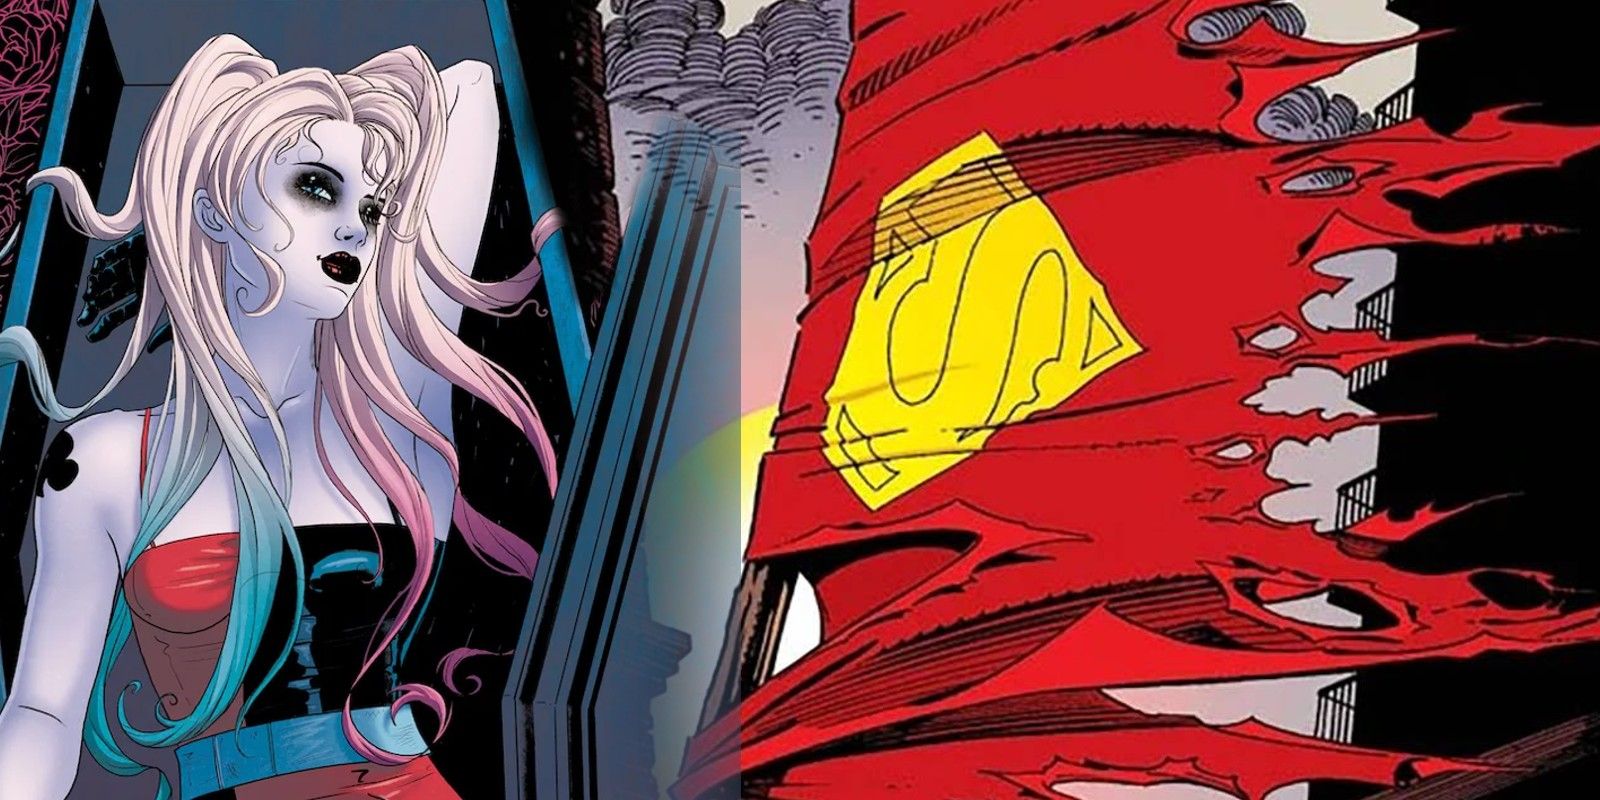 Harley Quinn in a Coffin Next to Superman's Cape on a Pole from Superman 75